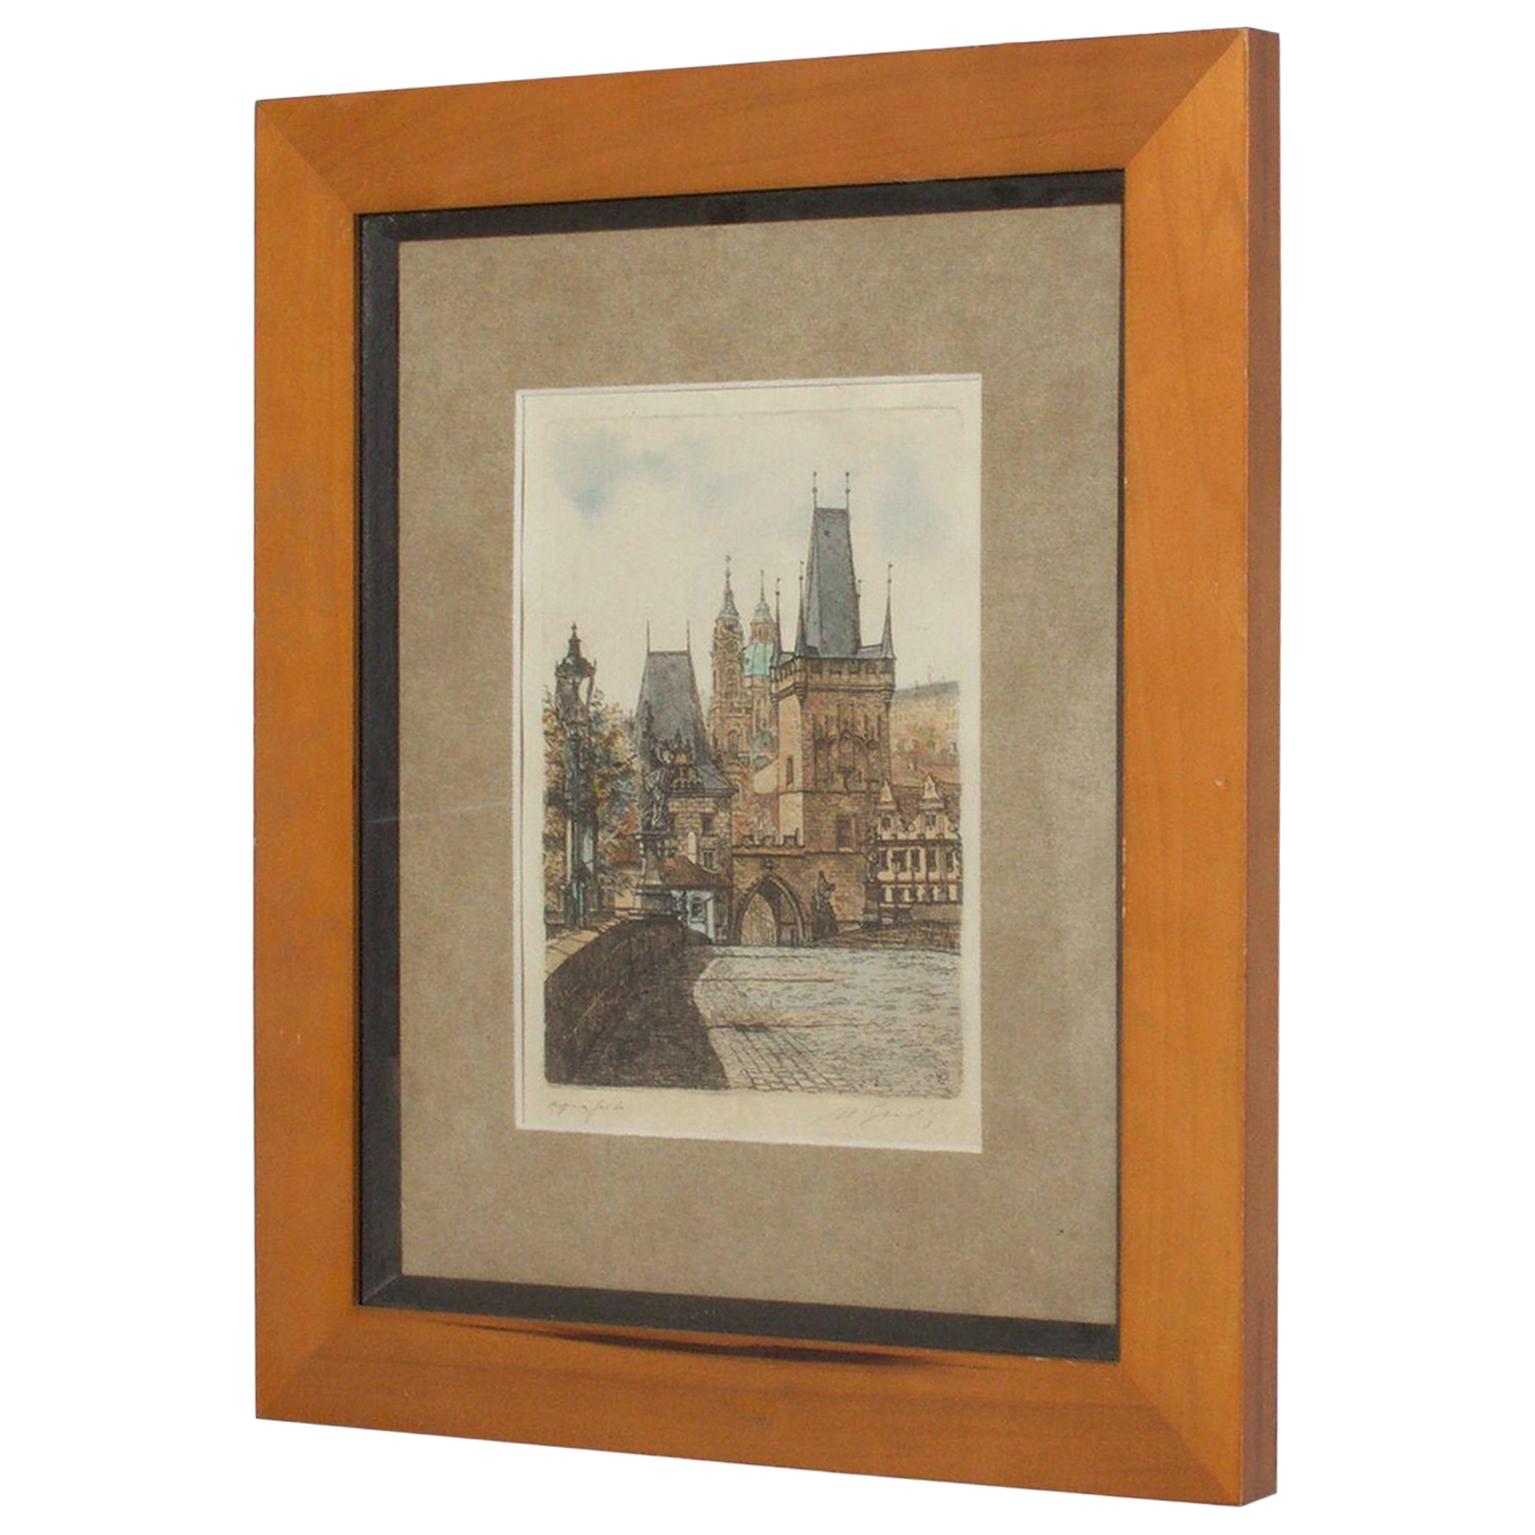 European Landscape Modern Art Embossed Color Etching
Framed with glass.
Signed but difficult to read.
 13.63